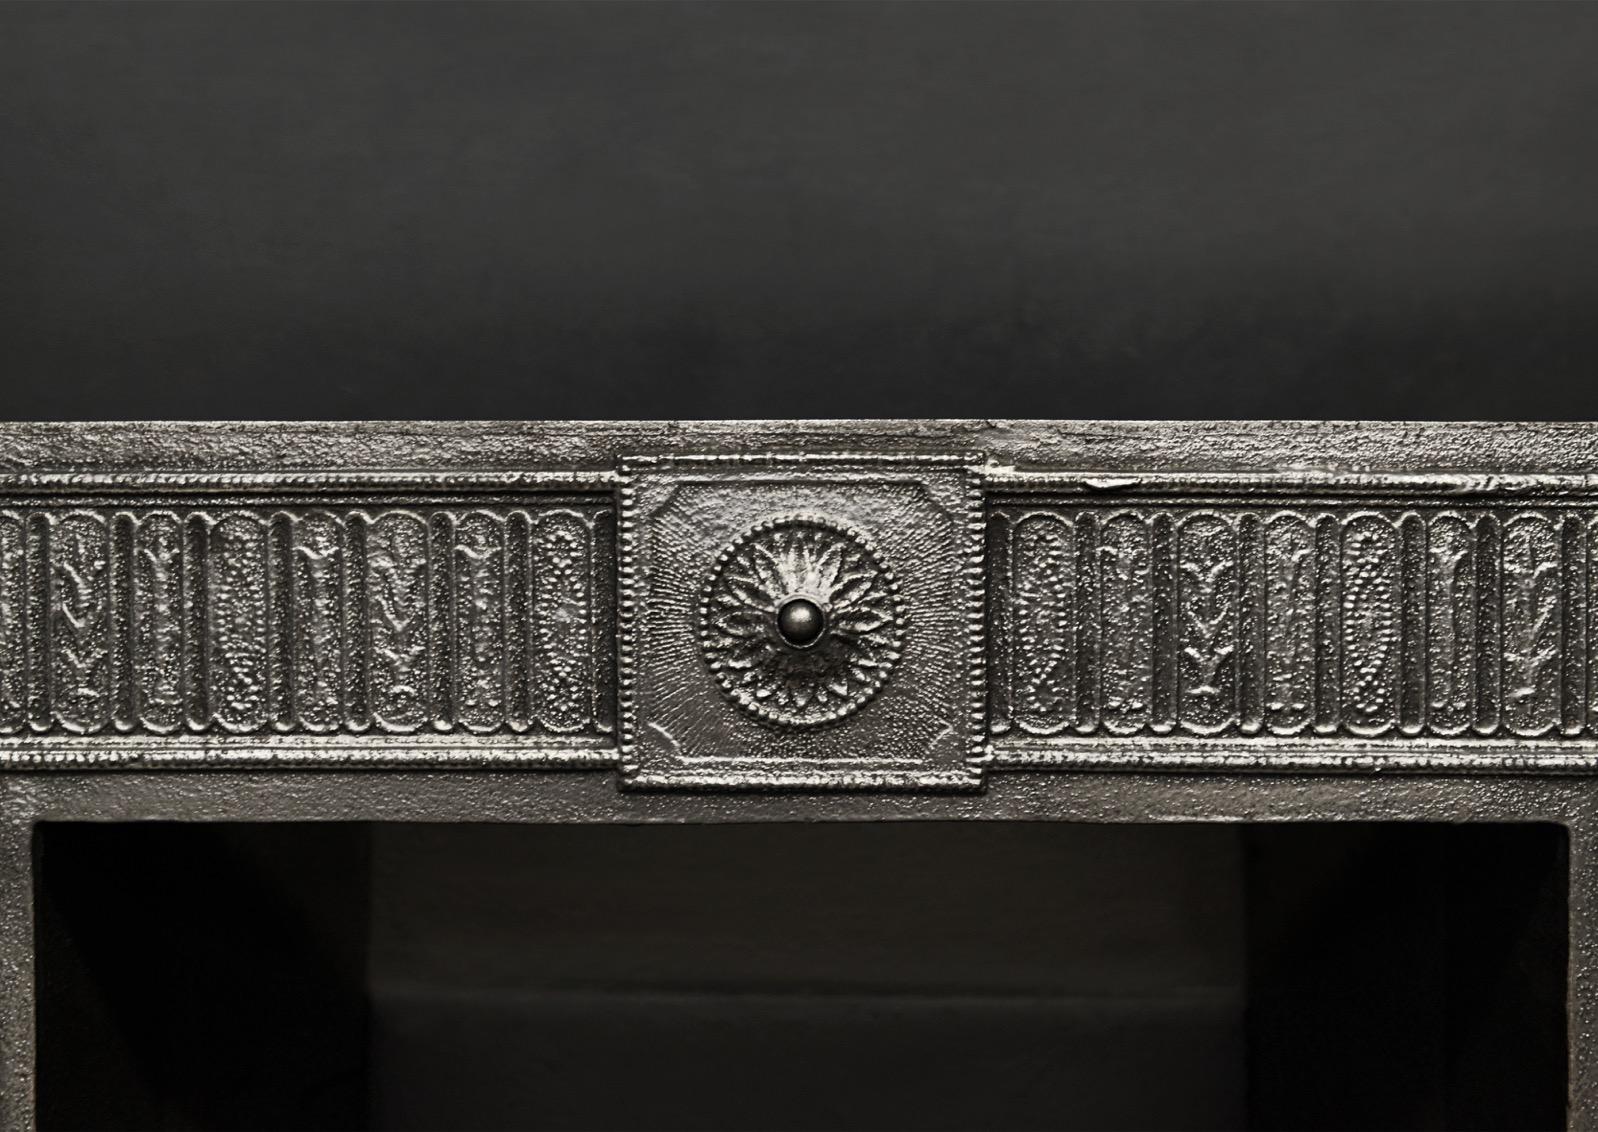 A fine quality decorative cast iron register grate. The outer frame with adorned with paterae, panelling and beading throughout. The burning area with urn finials, shaped front bars and pierced, fluted fret. English, early 19th century, possibly